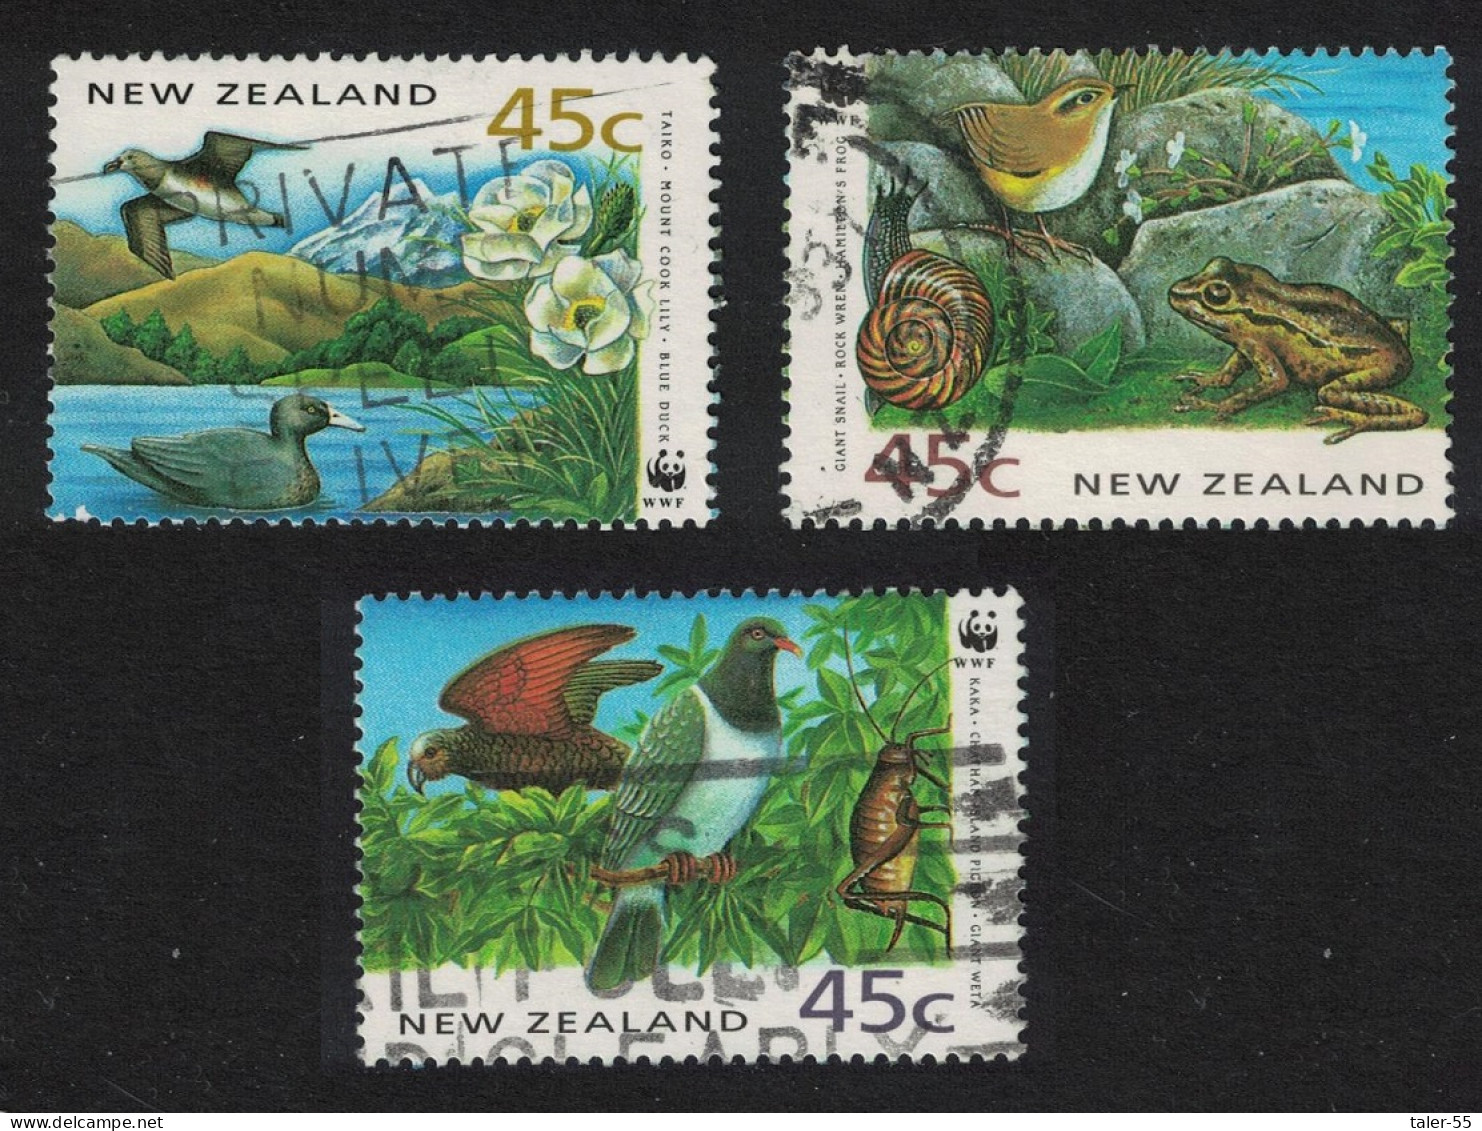 New Zealand WWF Birds Frog Dolphin Seal 3v 1993 Canc SG#1736-1739 MI#1290-1292 Sc#1162 A-c - Used Stamps